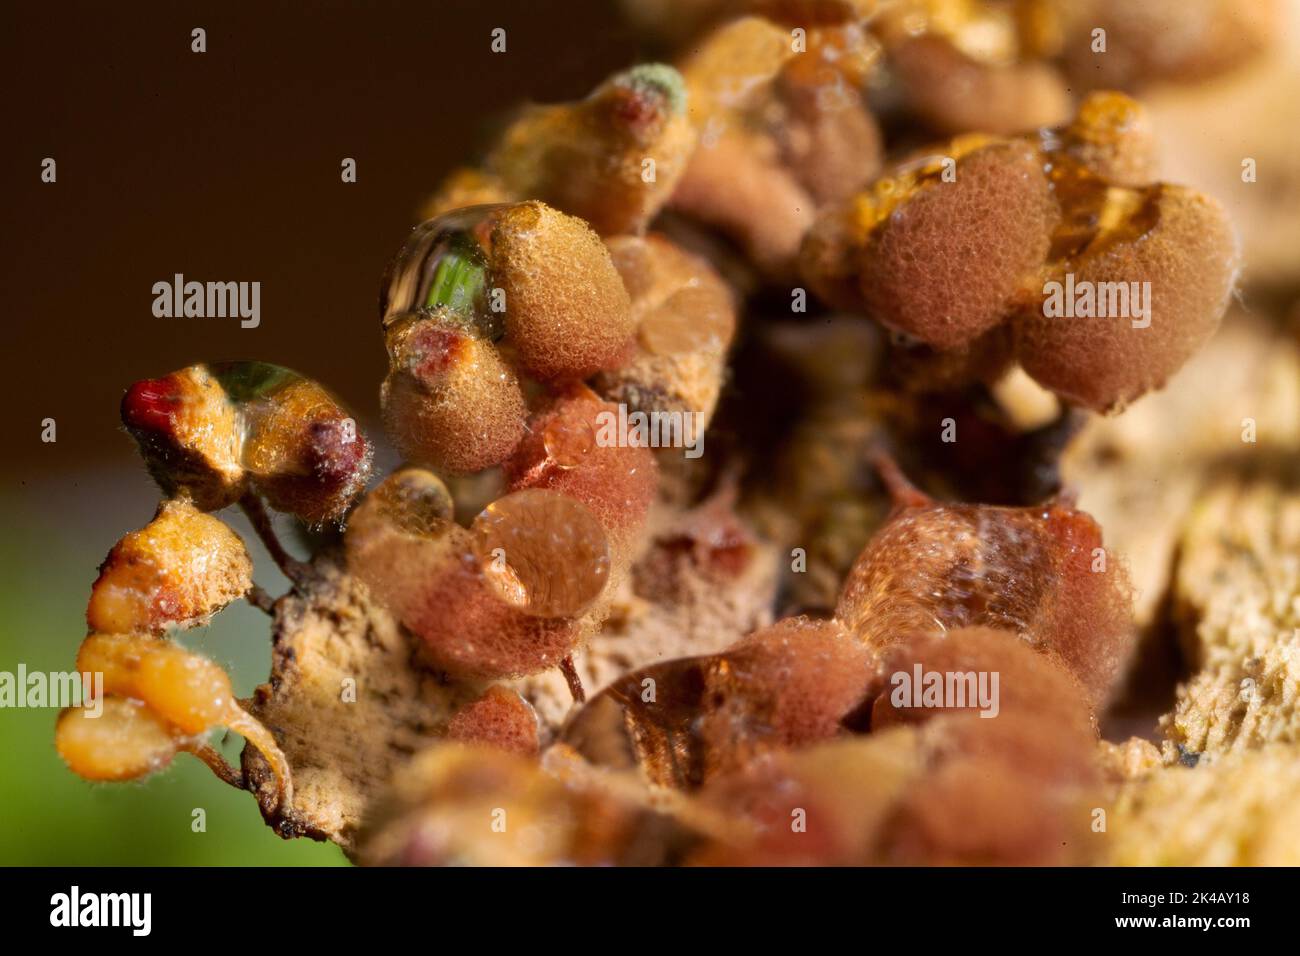 Brick red stalk slime mould many light brown green and red fruit bodies next to each other Stock Photo